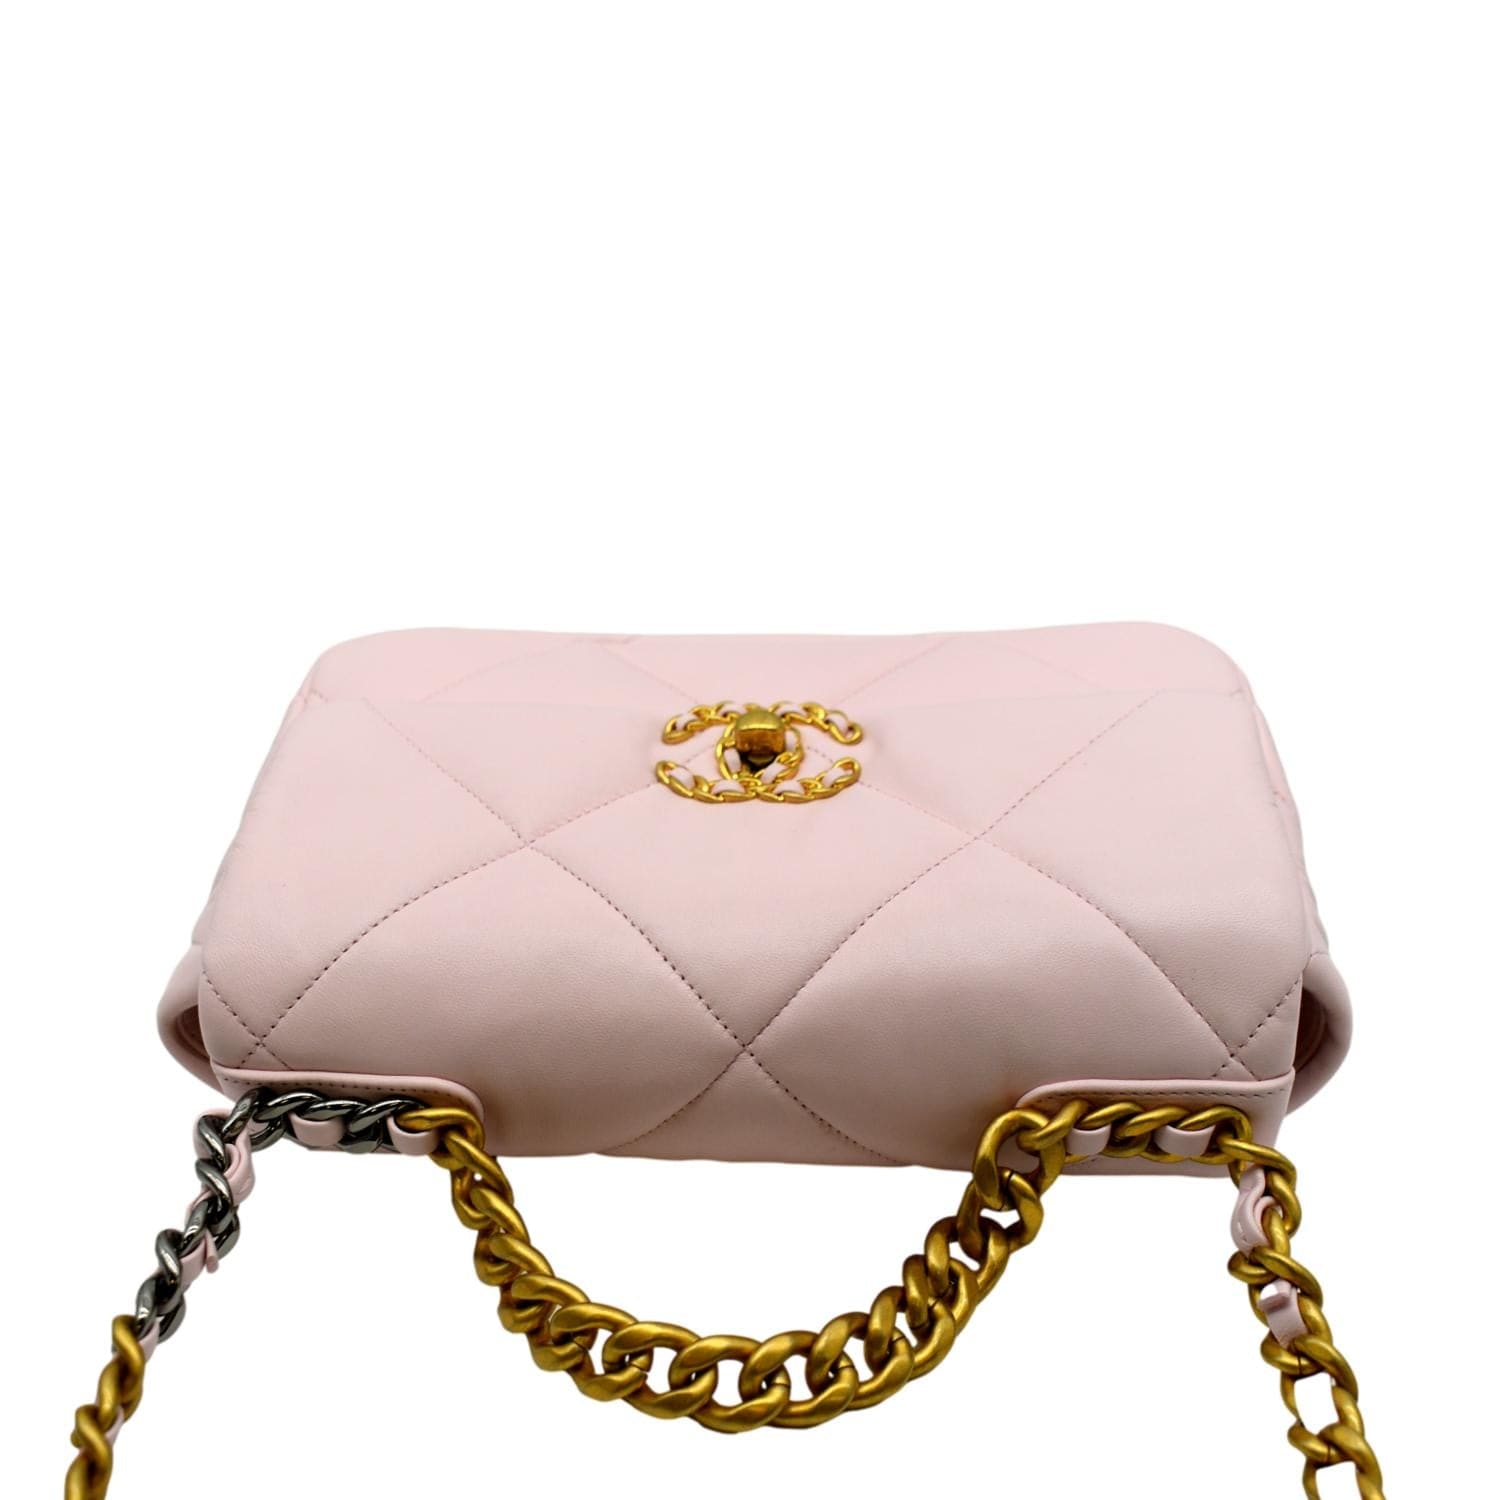 Chanel 19 leather handbag Chanel Pink in Leather - 35946522